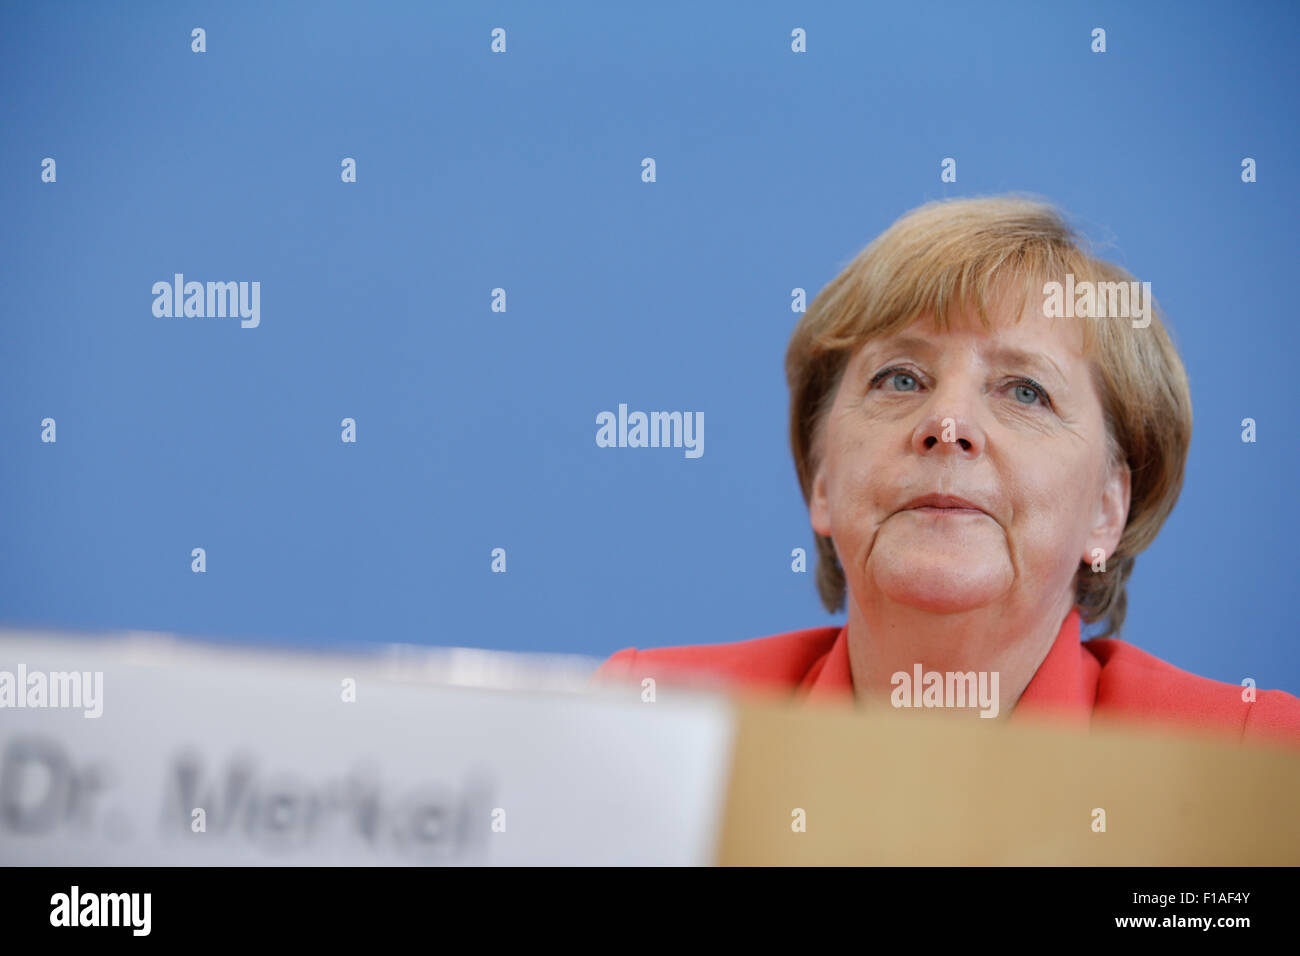 Berlin, Germany. 31st Aug, 2015. German Chancellor Angela Merkel during press conference on foreign and domestic policy at the house of the federal press conference in Berlin, Germany on 31 august 2015. / Picture: Angela Merkel, german chancellor, answering questions about foreign and domestic policy during a press conference at the house of the federal press conference in Berlin. Credit:  Reynaldo Chaib Paganelli/Alamy Live News Stock Photo